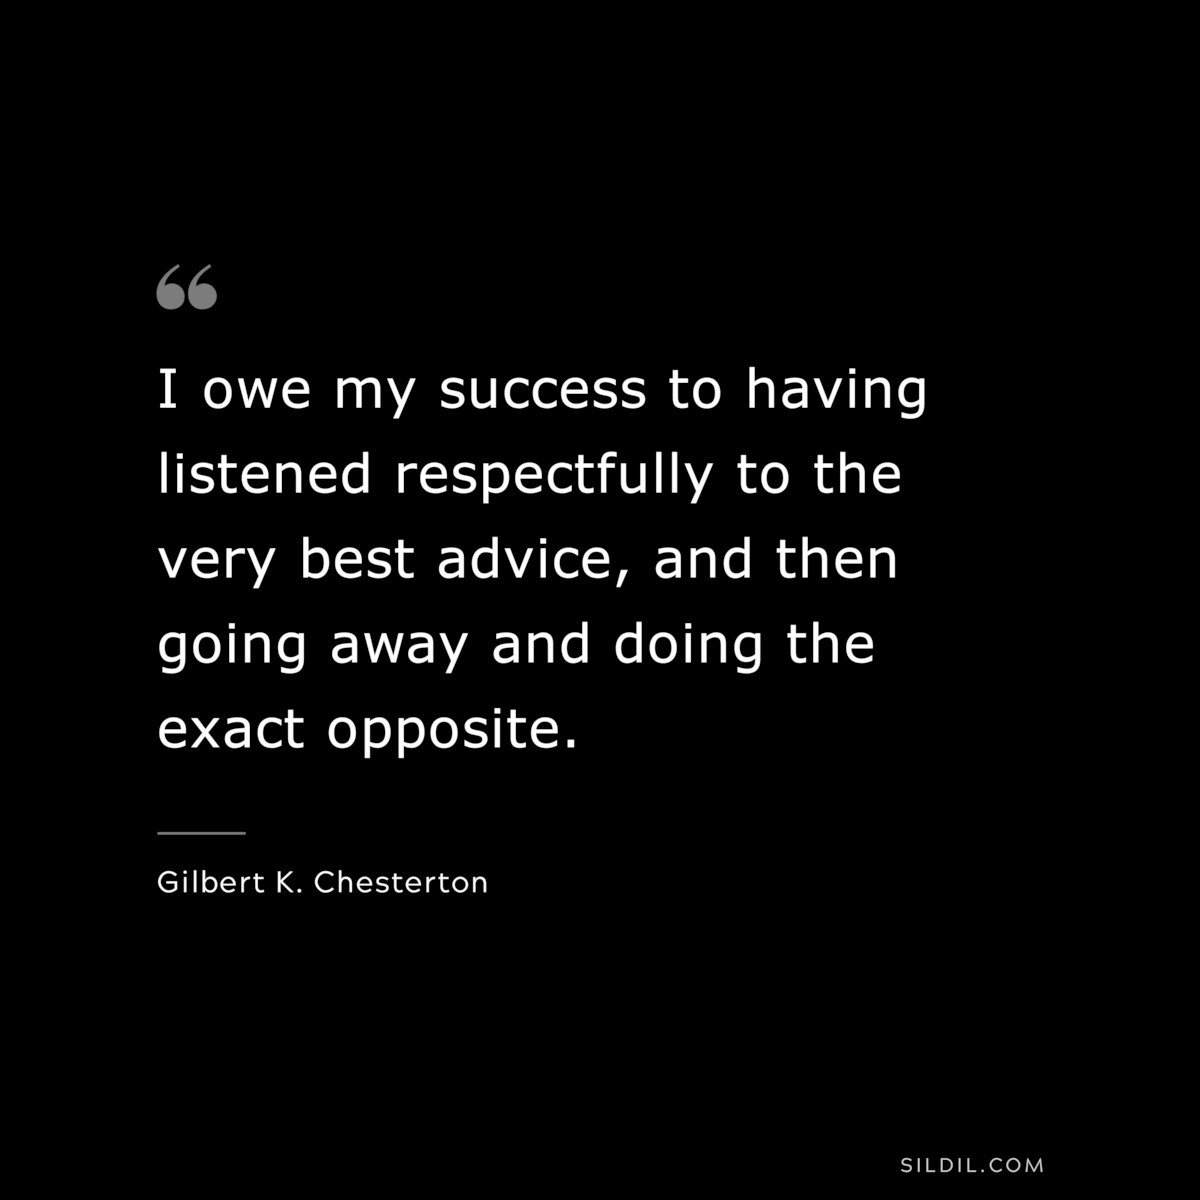 I owe my success to having listened respectfully to the very best advice, and then going away and doing the exact opposite. ― Gilbert K. Chesterton